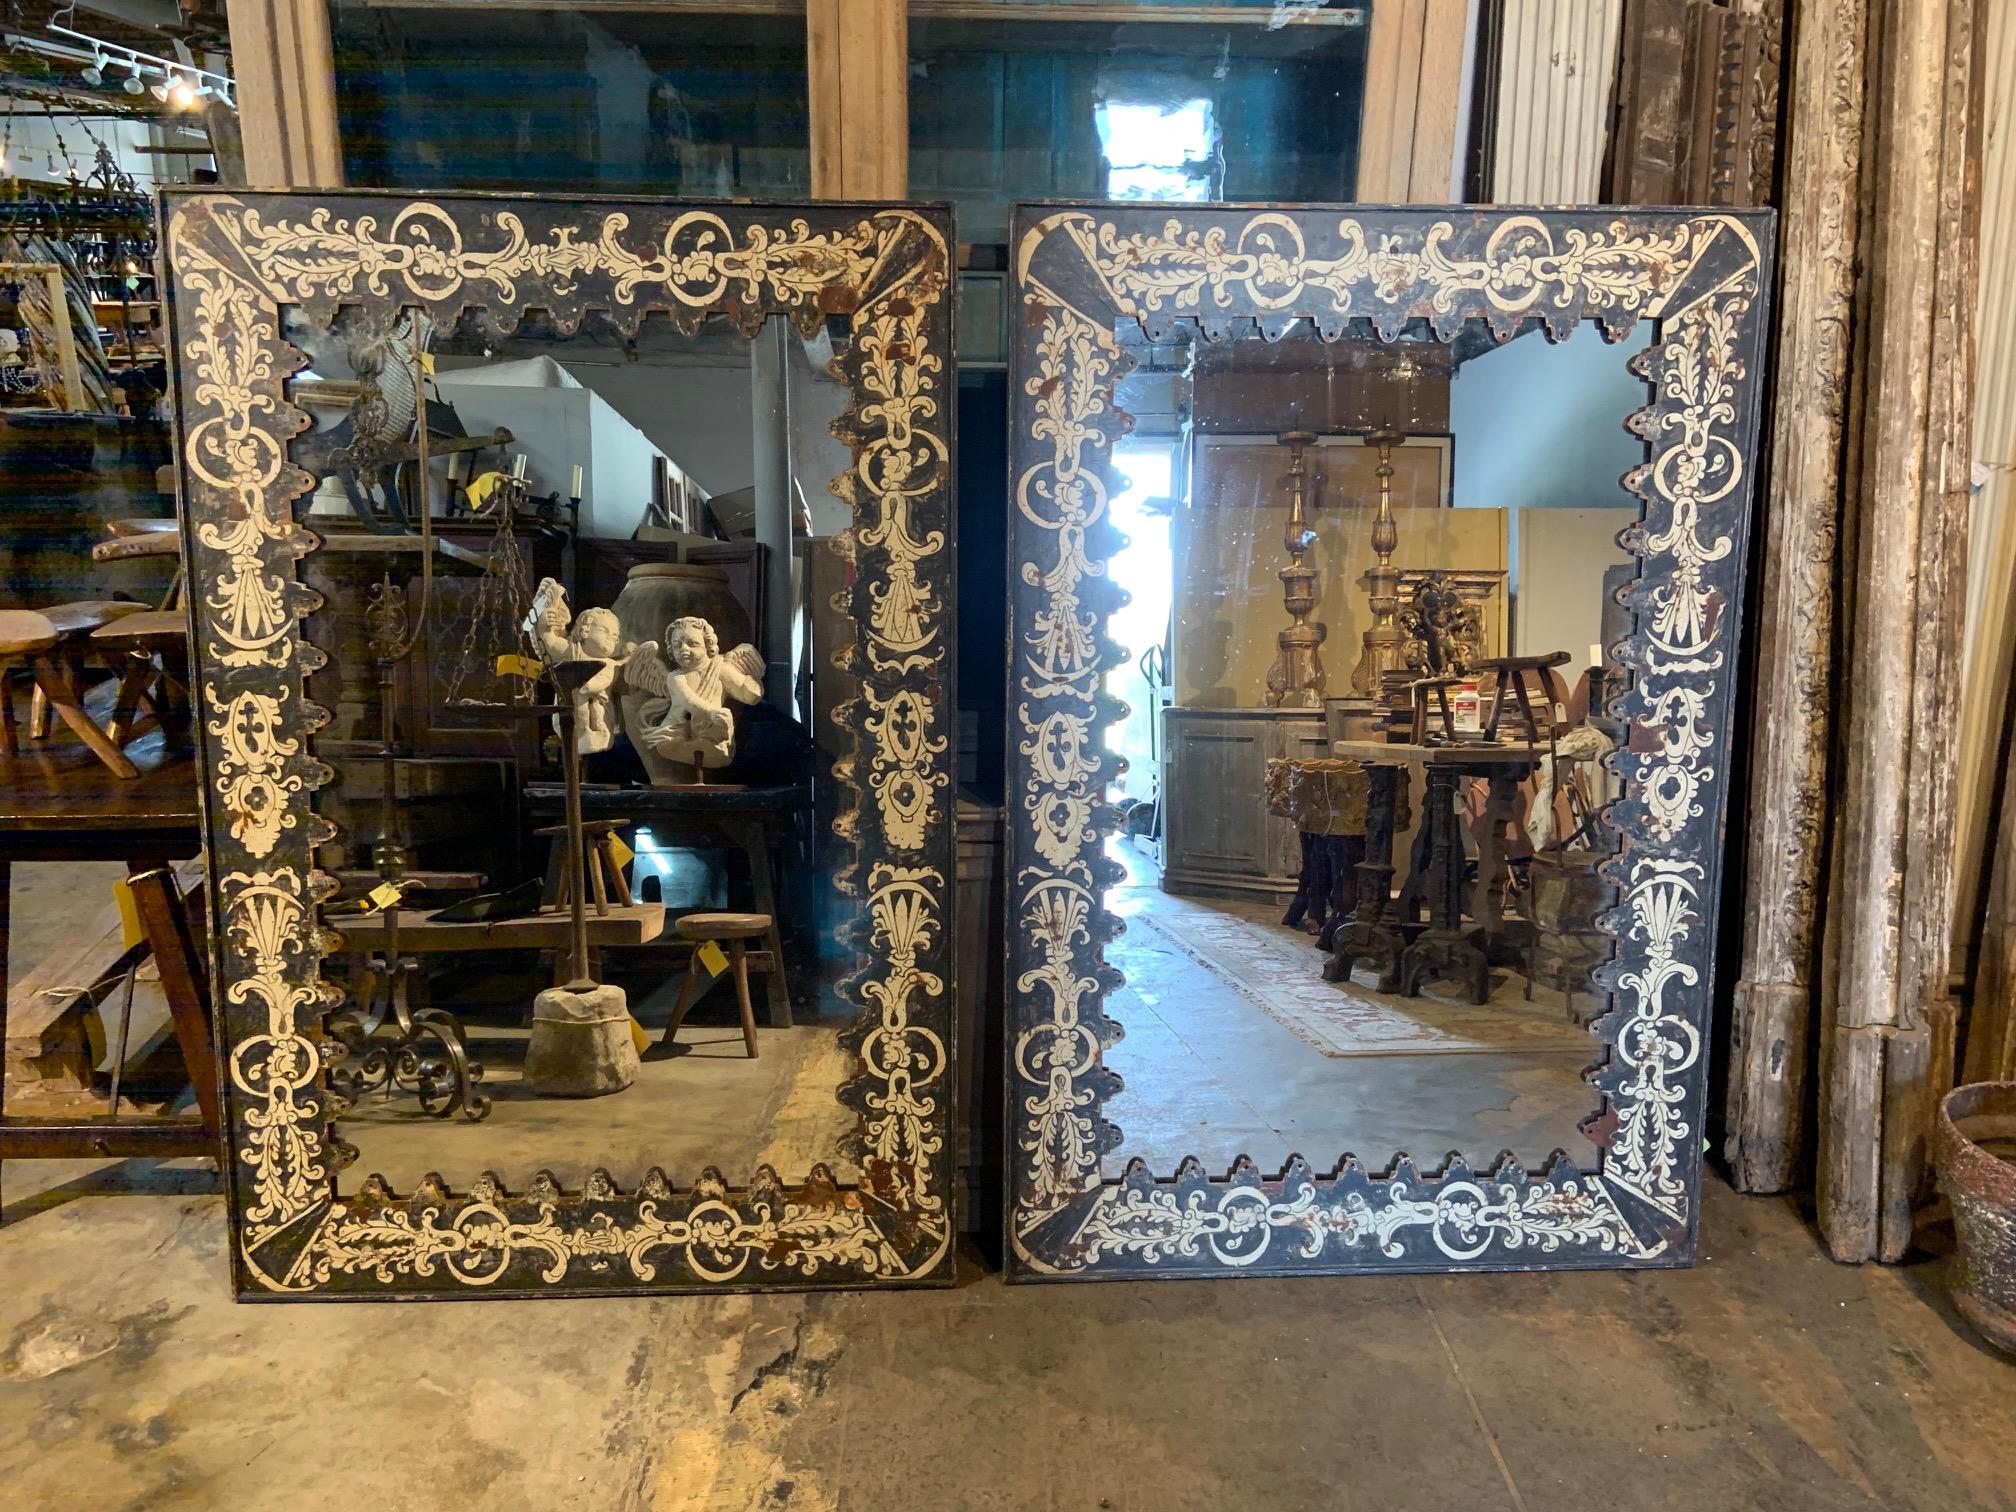 A terrific pair of Spanish mirrors constructed from painted reclaimed metal. The glass has been lightly crazed.